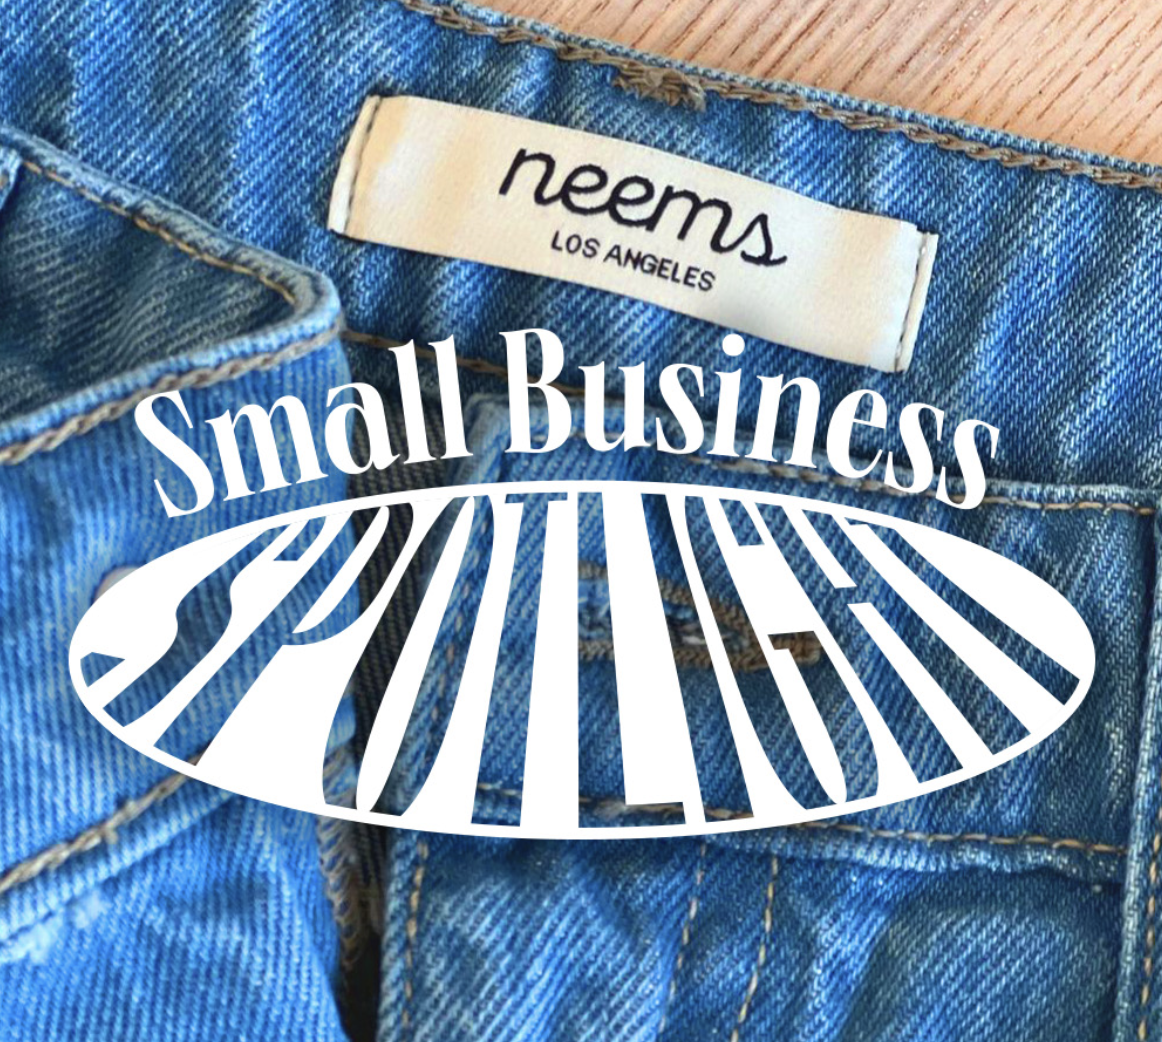 Neems Jeans Review: Made-to-Order Jeans That Gave Me the Perfect Fit